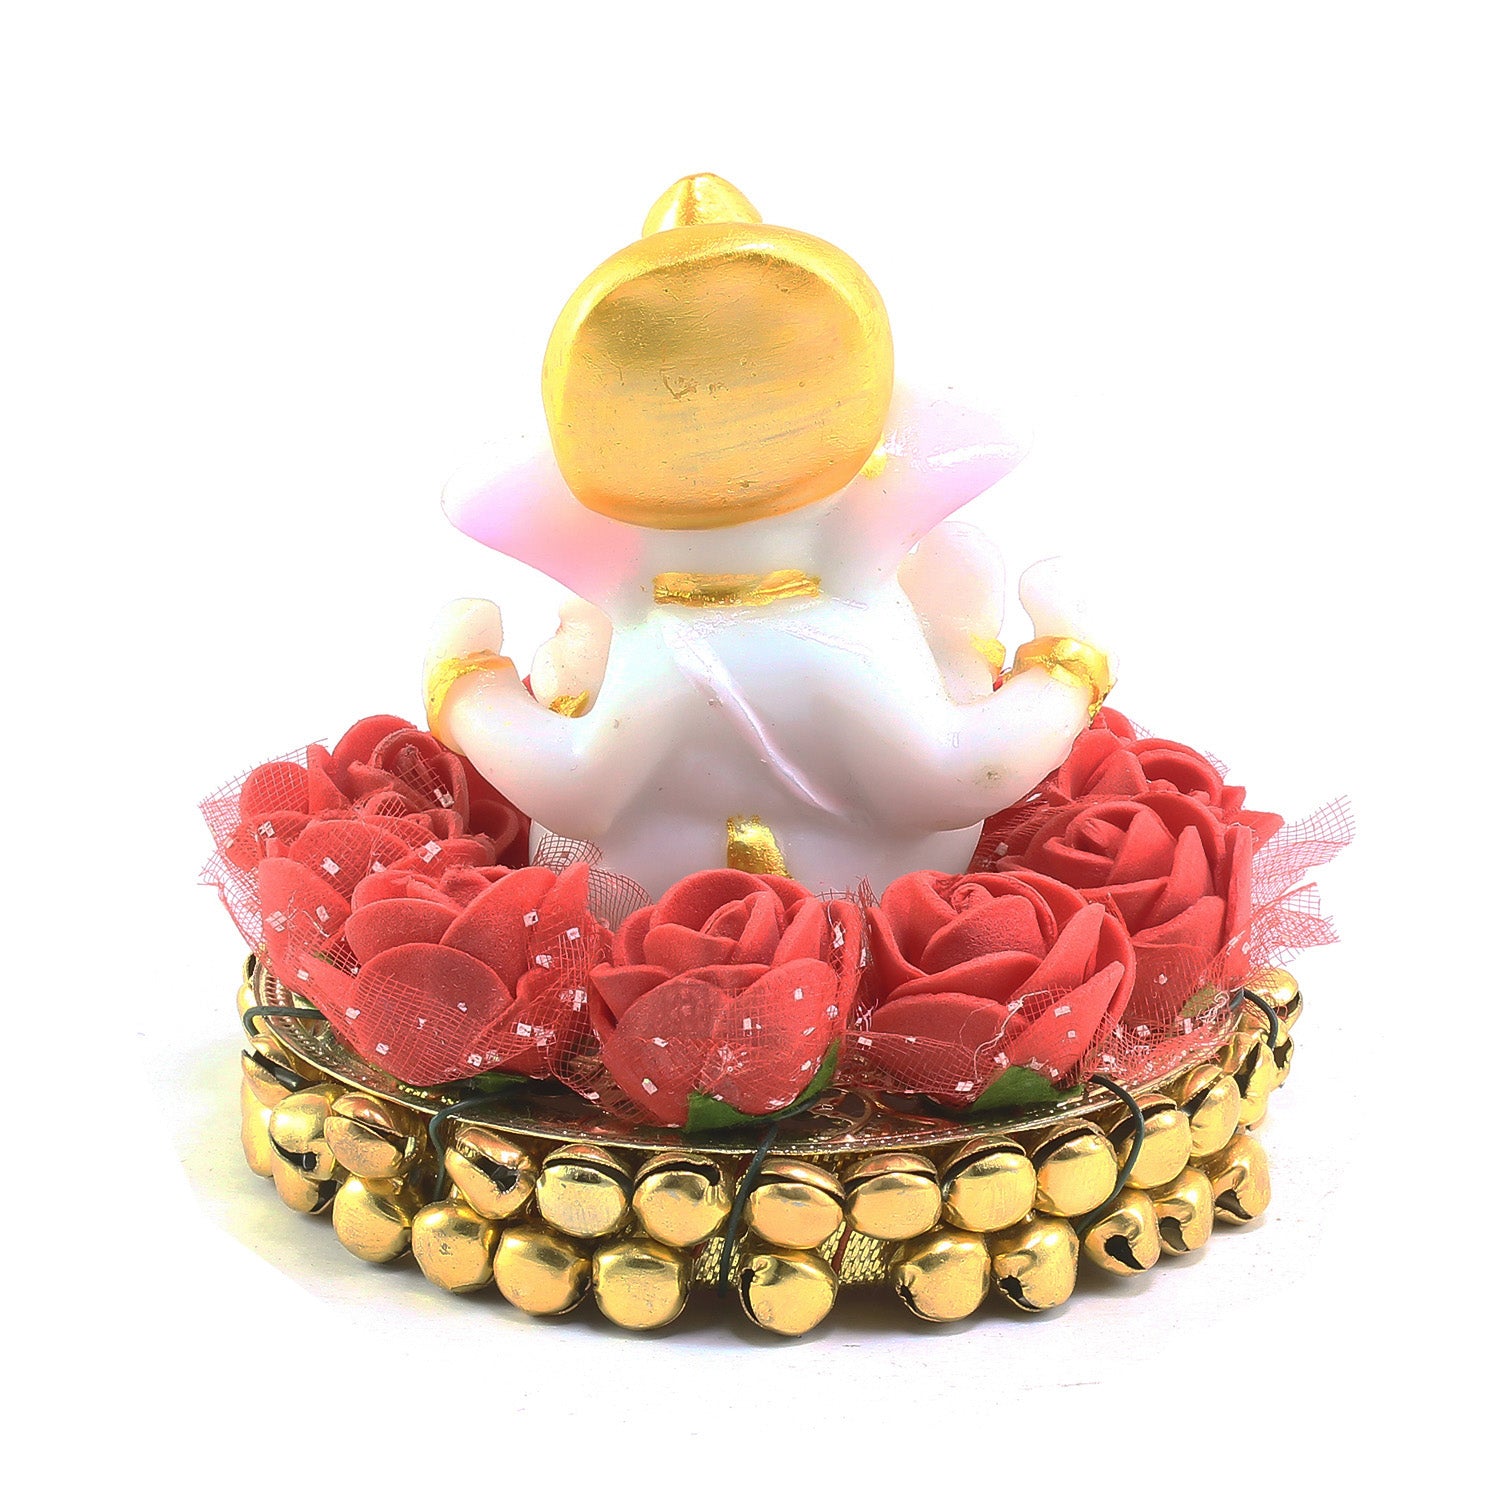 Polyresin Lord Ganesha Idol on Decorative Plate for Car Dashboard and Home 5